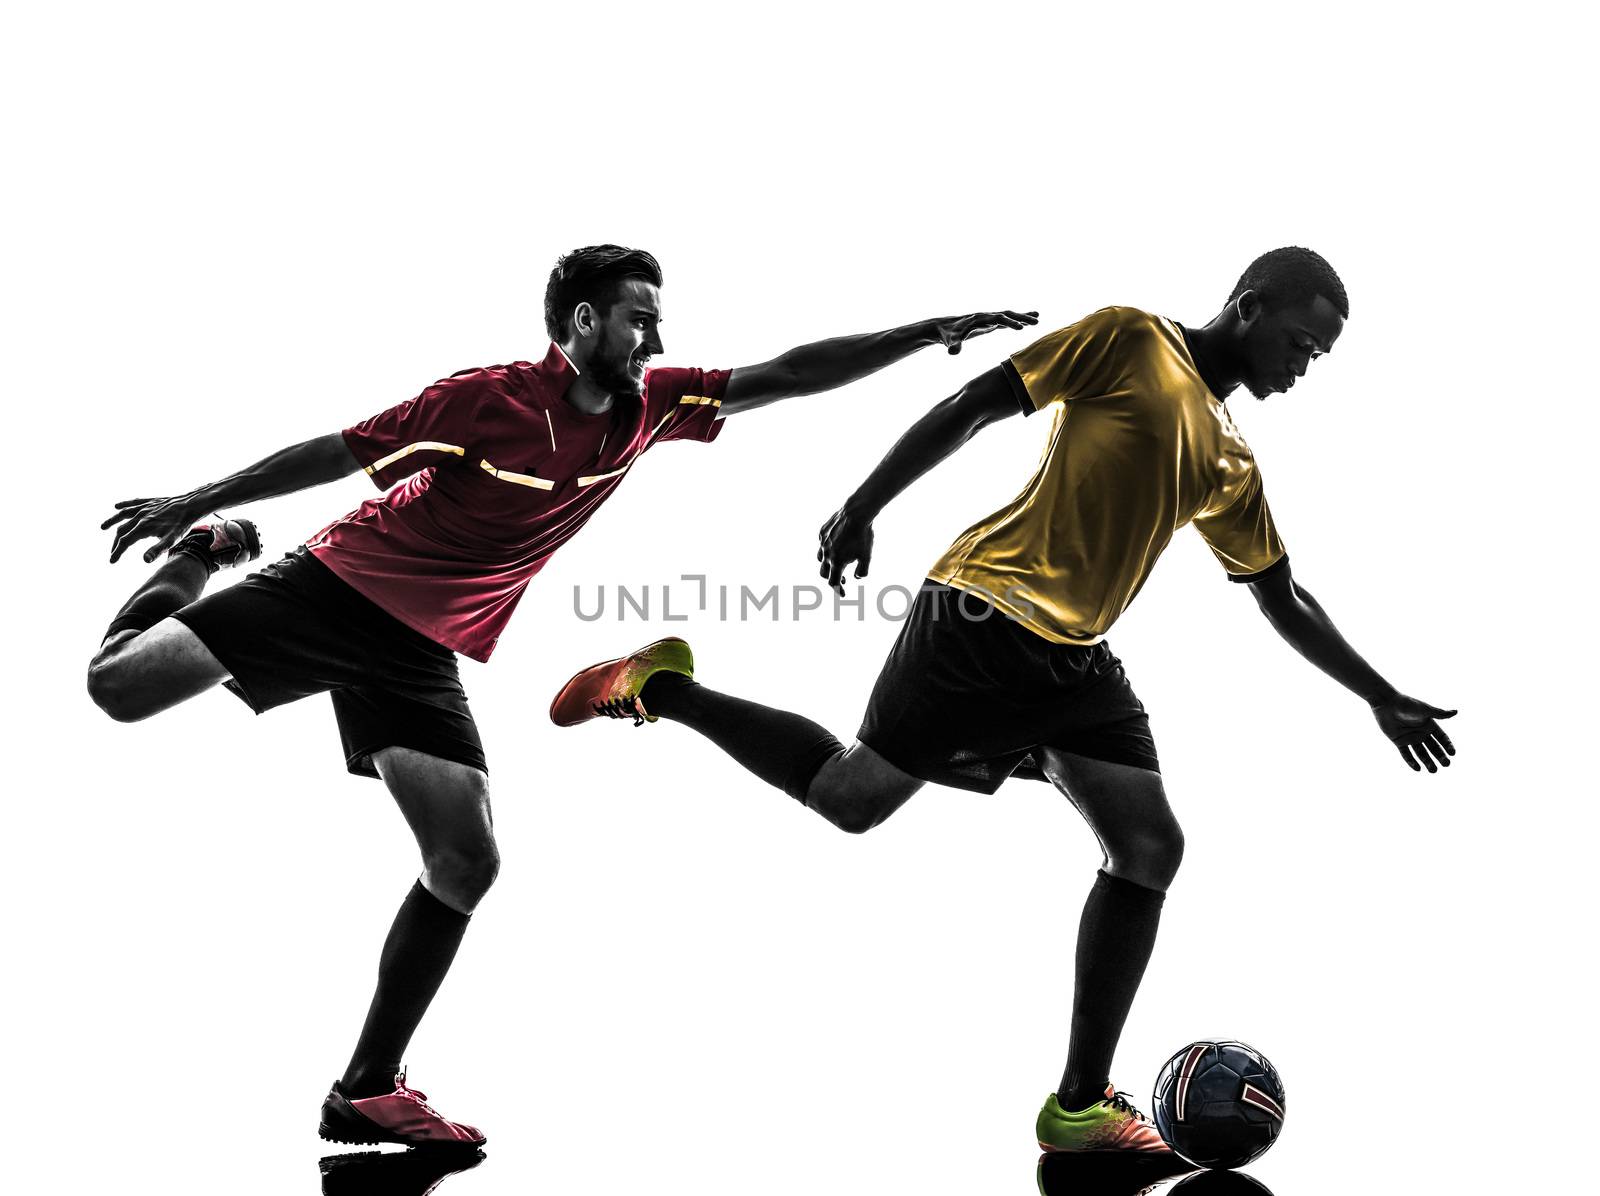 two men soccer player playing football competition in silhouette on white background